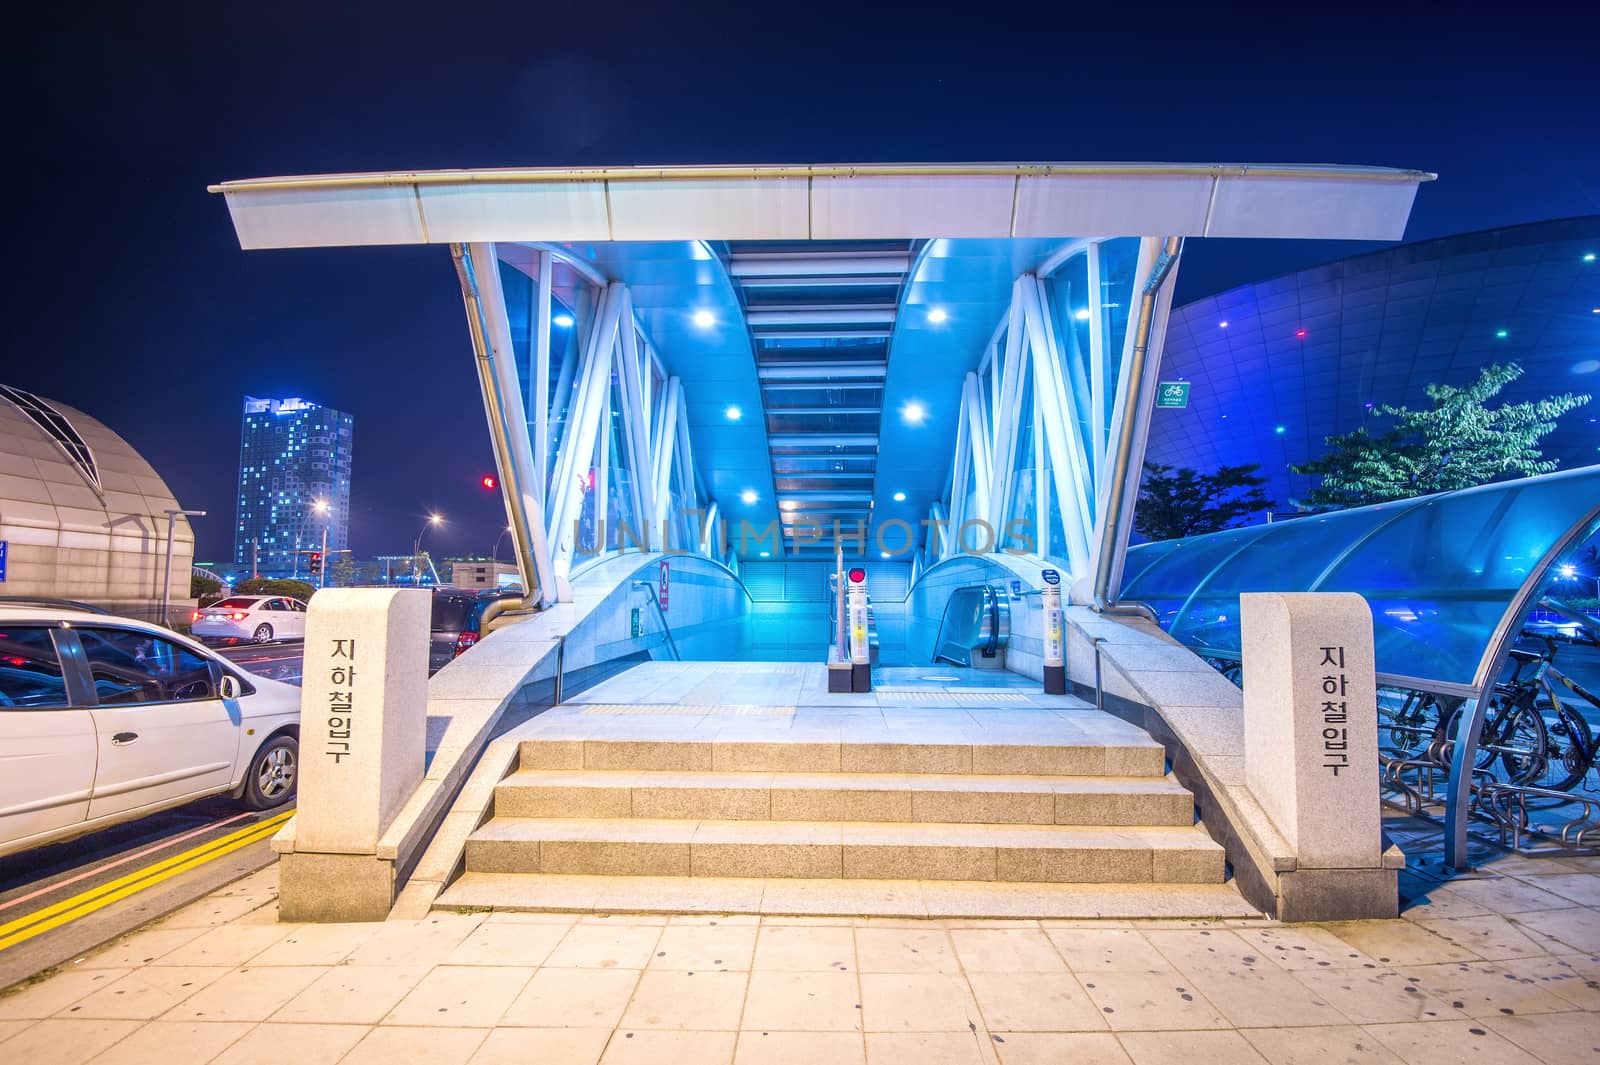 INCHEON, SOUTH KOREA - SEPTEMBER 19 : Entrance to metro station in Central park, Incheon. Photo taken September 19,2015 in Incheon, South Korea.